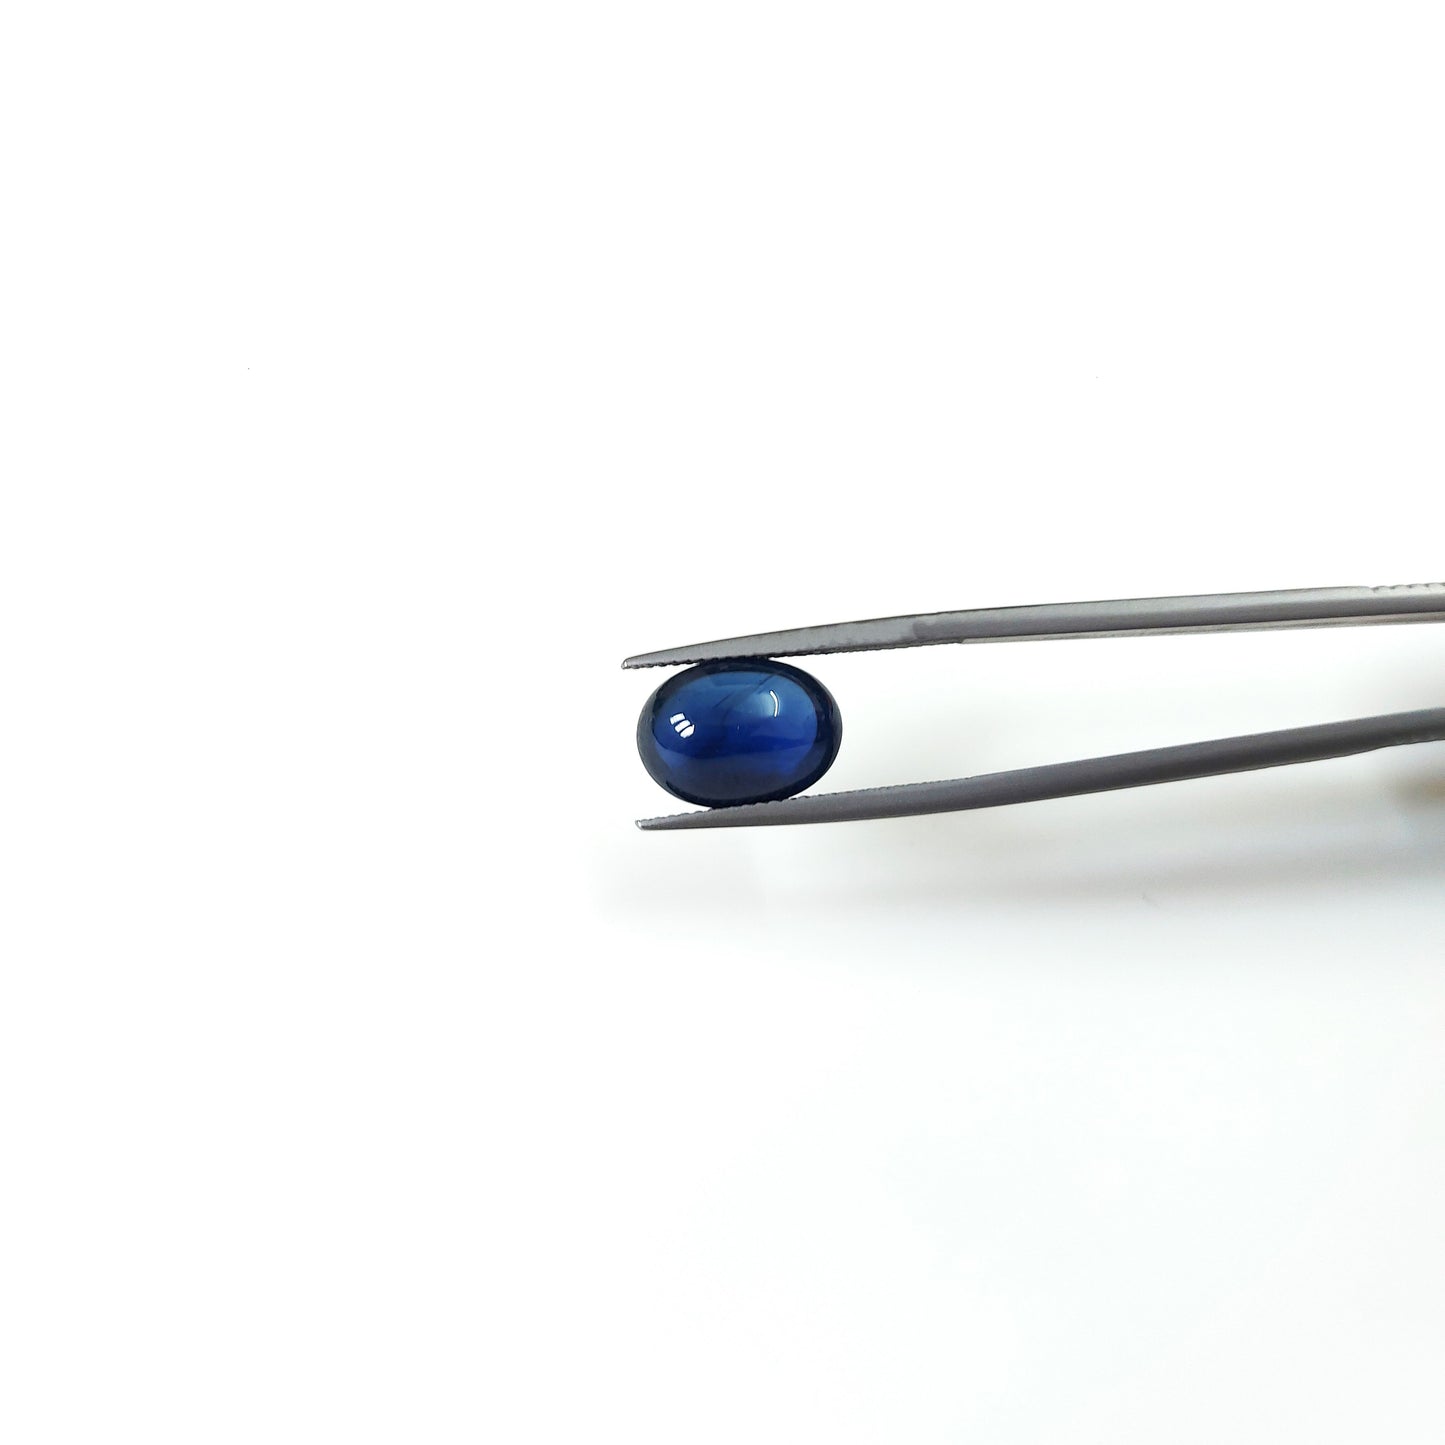 100% Natural Blue Sapphire Heated Cabochon Oval |  7.10cts